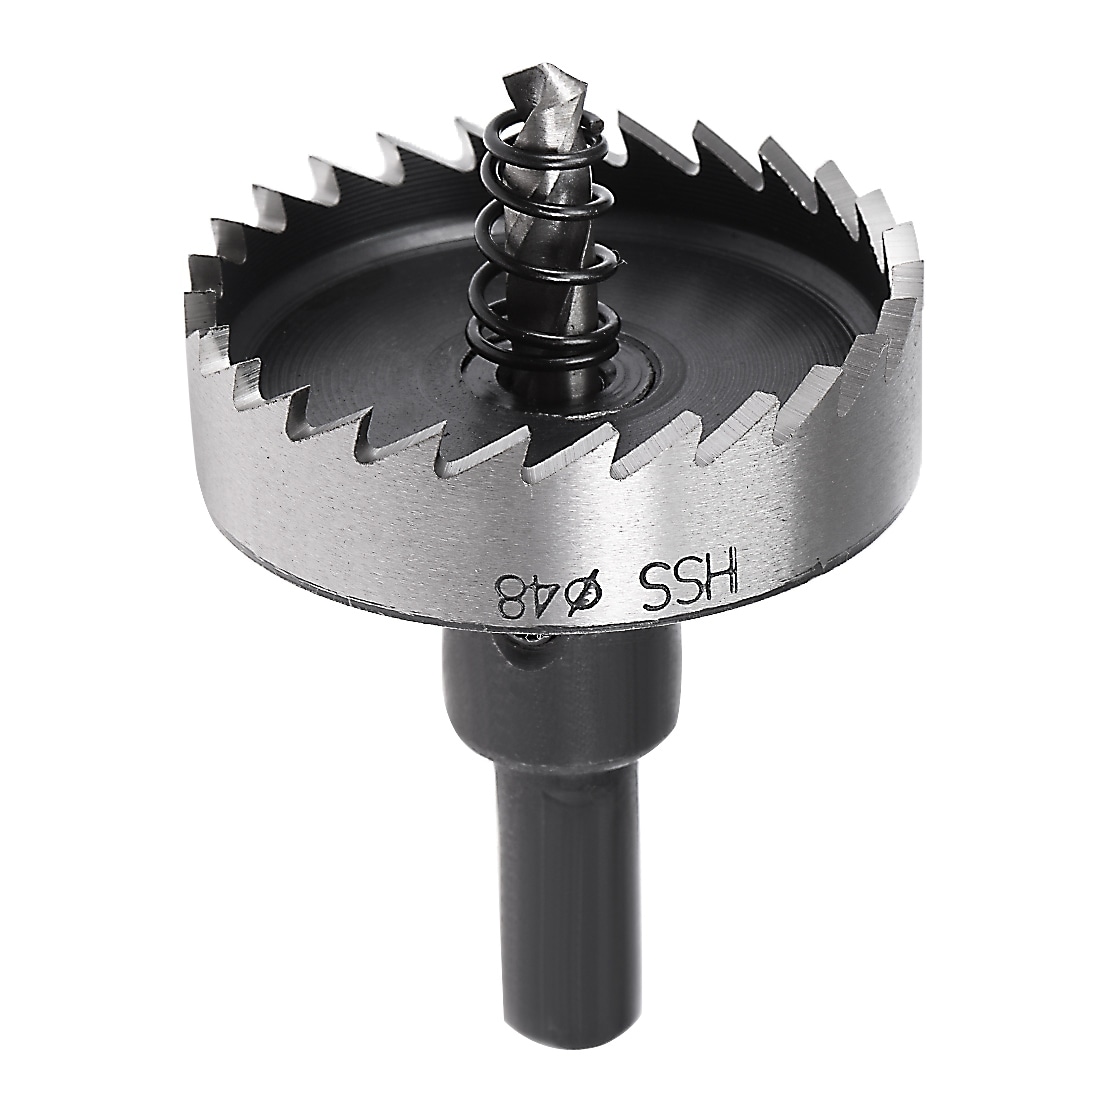 40mm Carbide Tip Tool Cutter Stainless Steel Drill Bit Hole Saw Holesaw 